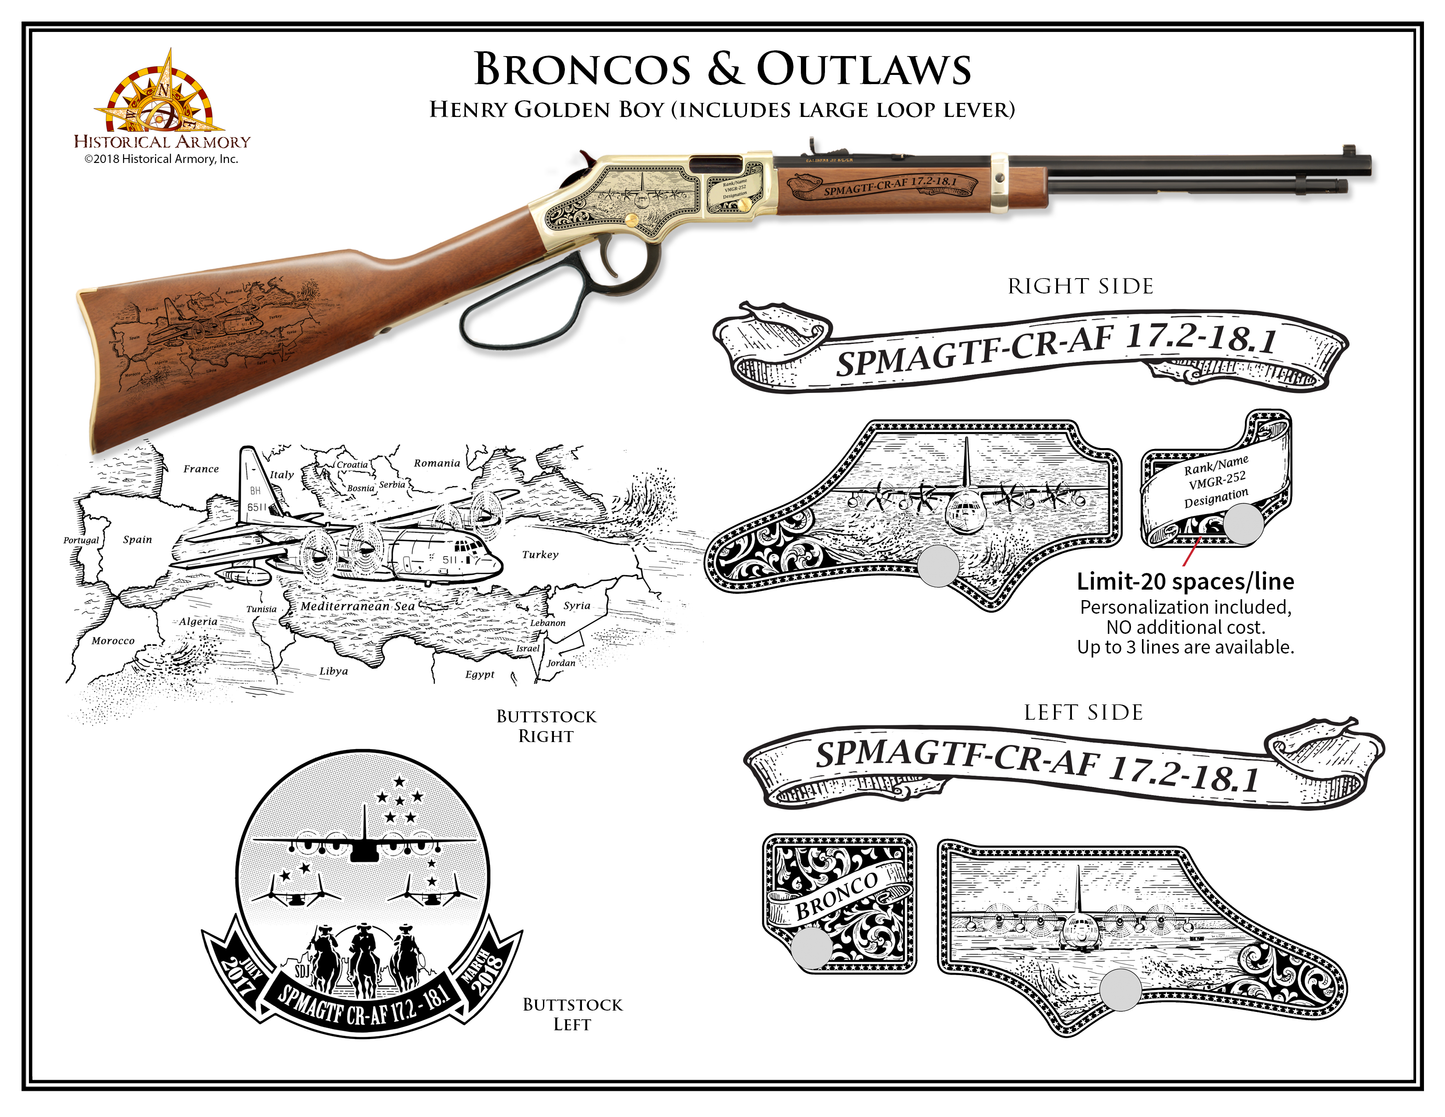 Broncos and Outlaws Edition